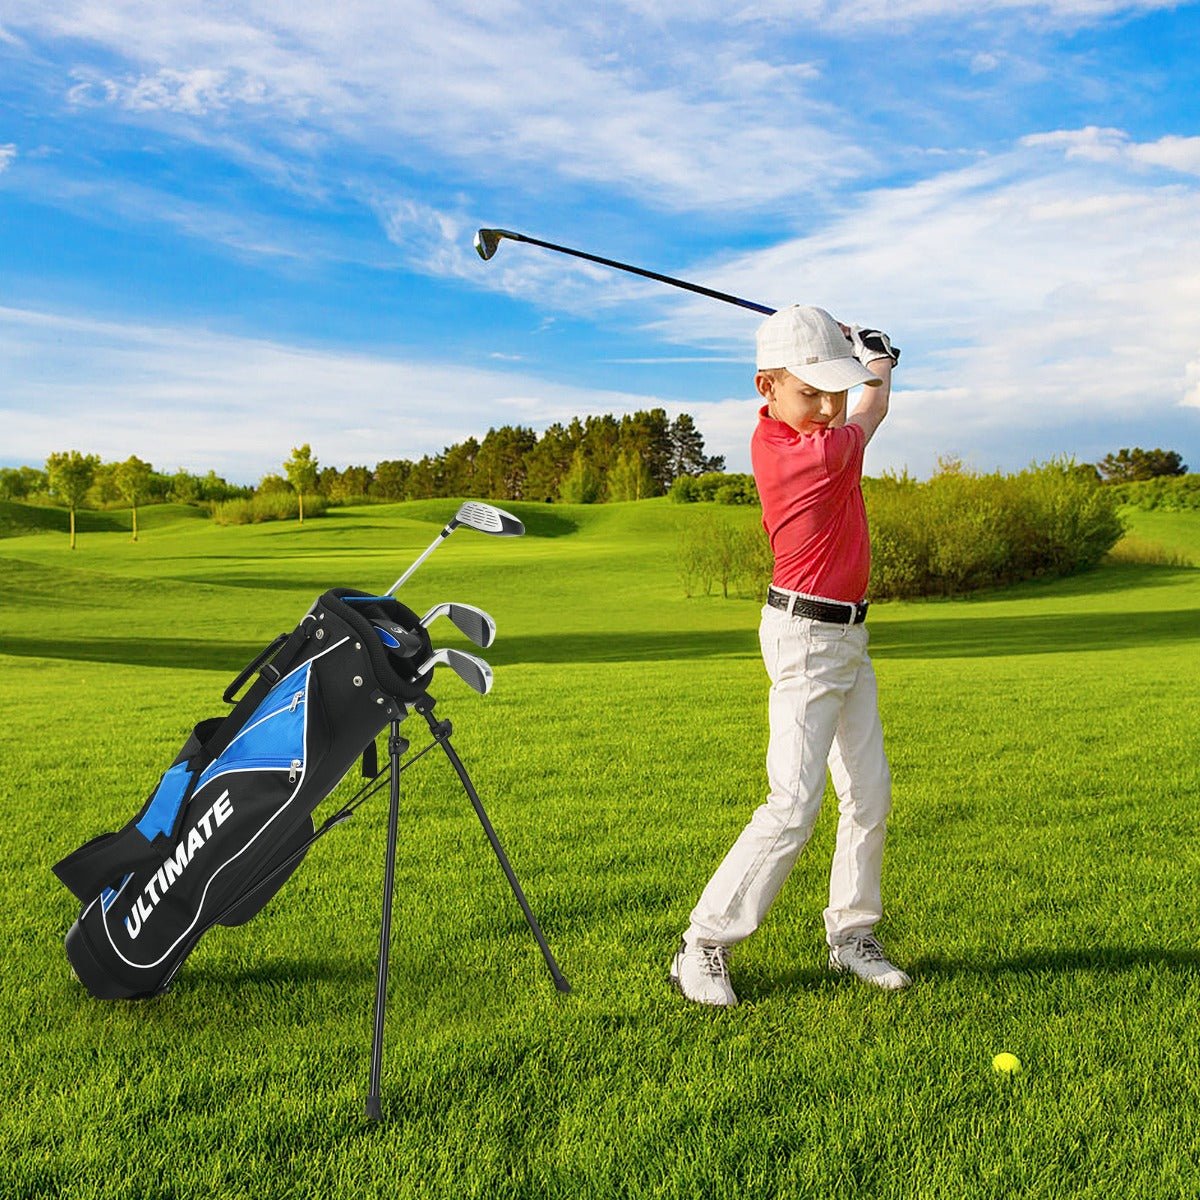 Young Golf Enthusiasts: Junior Complete Golf Club Set for Ages 11-13